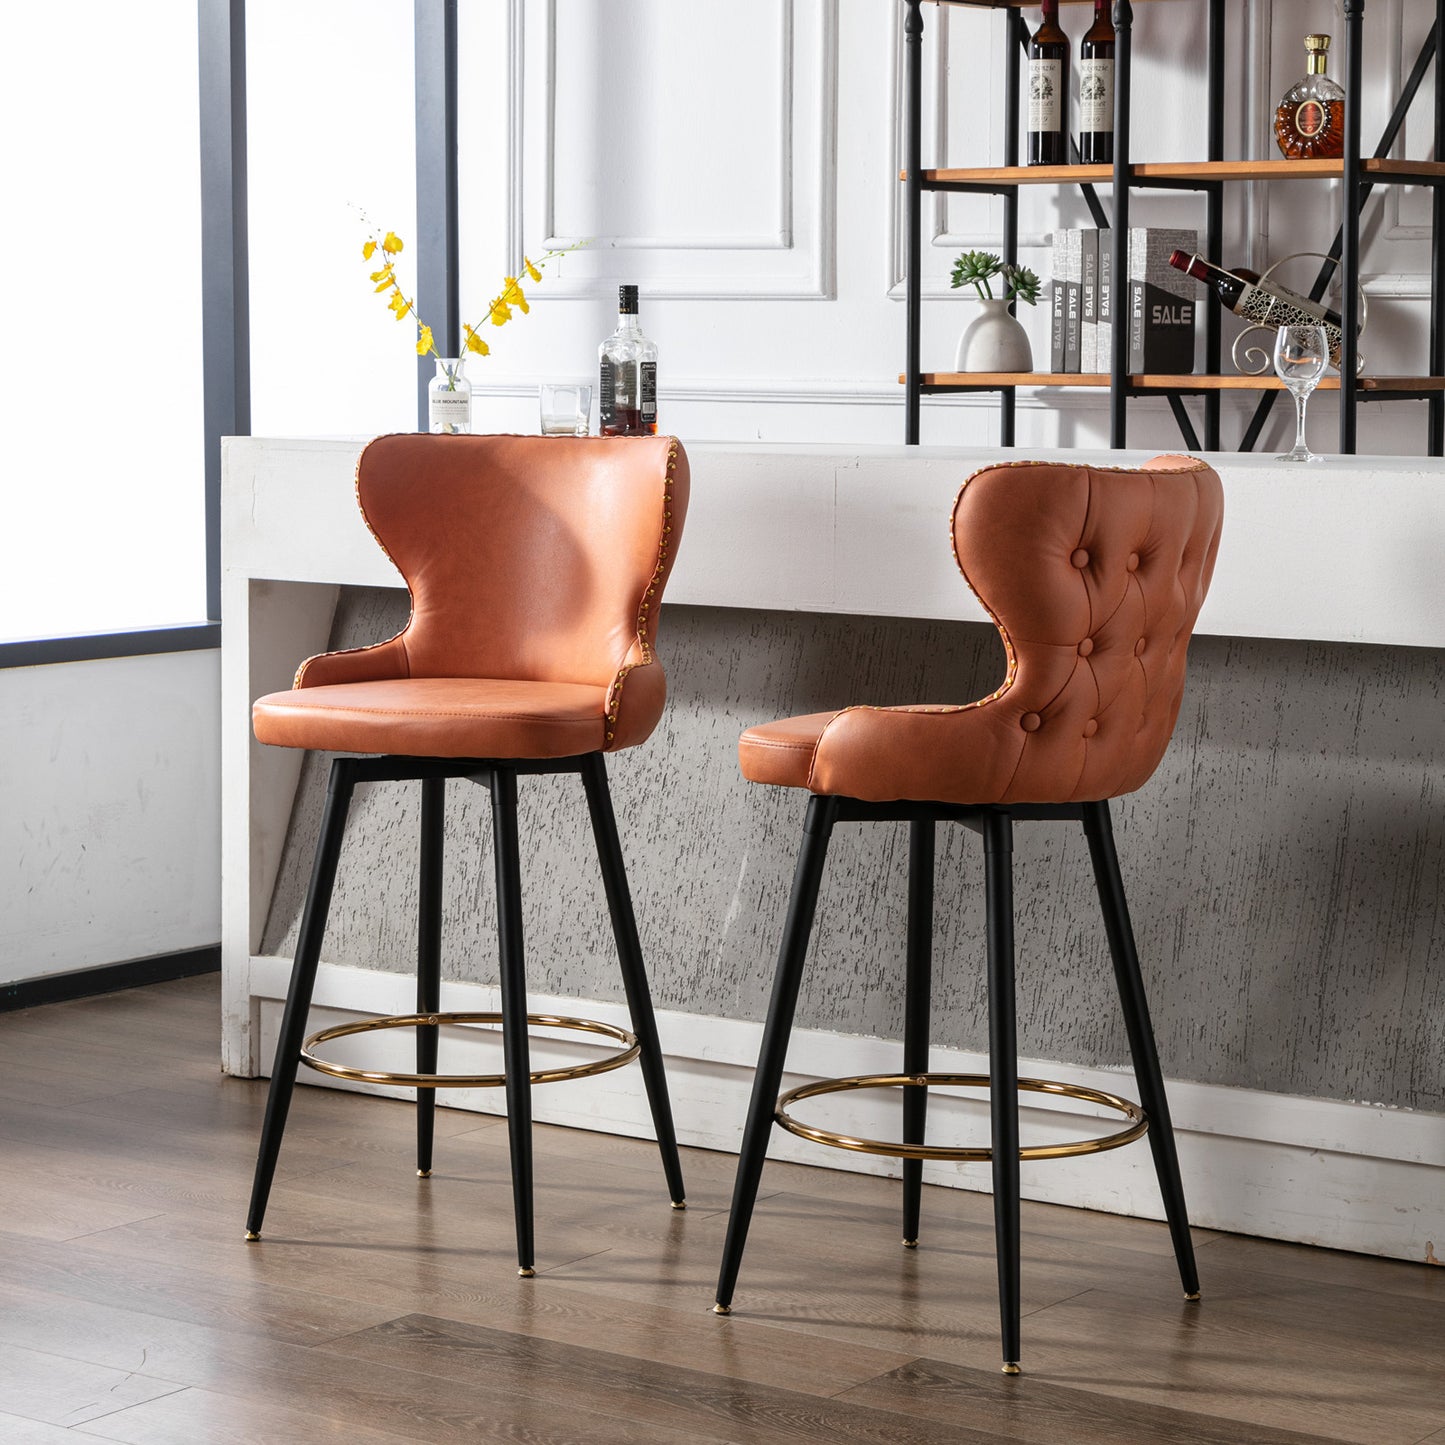 29" Modern Leathaire Fabric bar chairs, 180 degree Swivel Bar Stool Chair for Kitchen, Tufted Gold Nailhead Trim Gold Decoration Bar Stools with Metal Legs, Set of 2 (Orange)